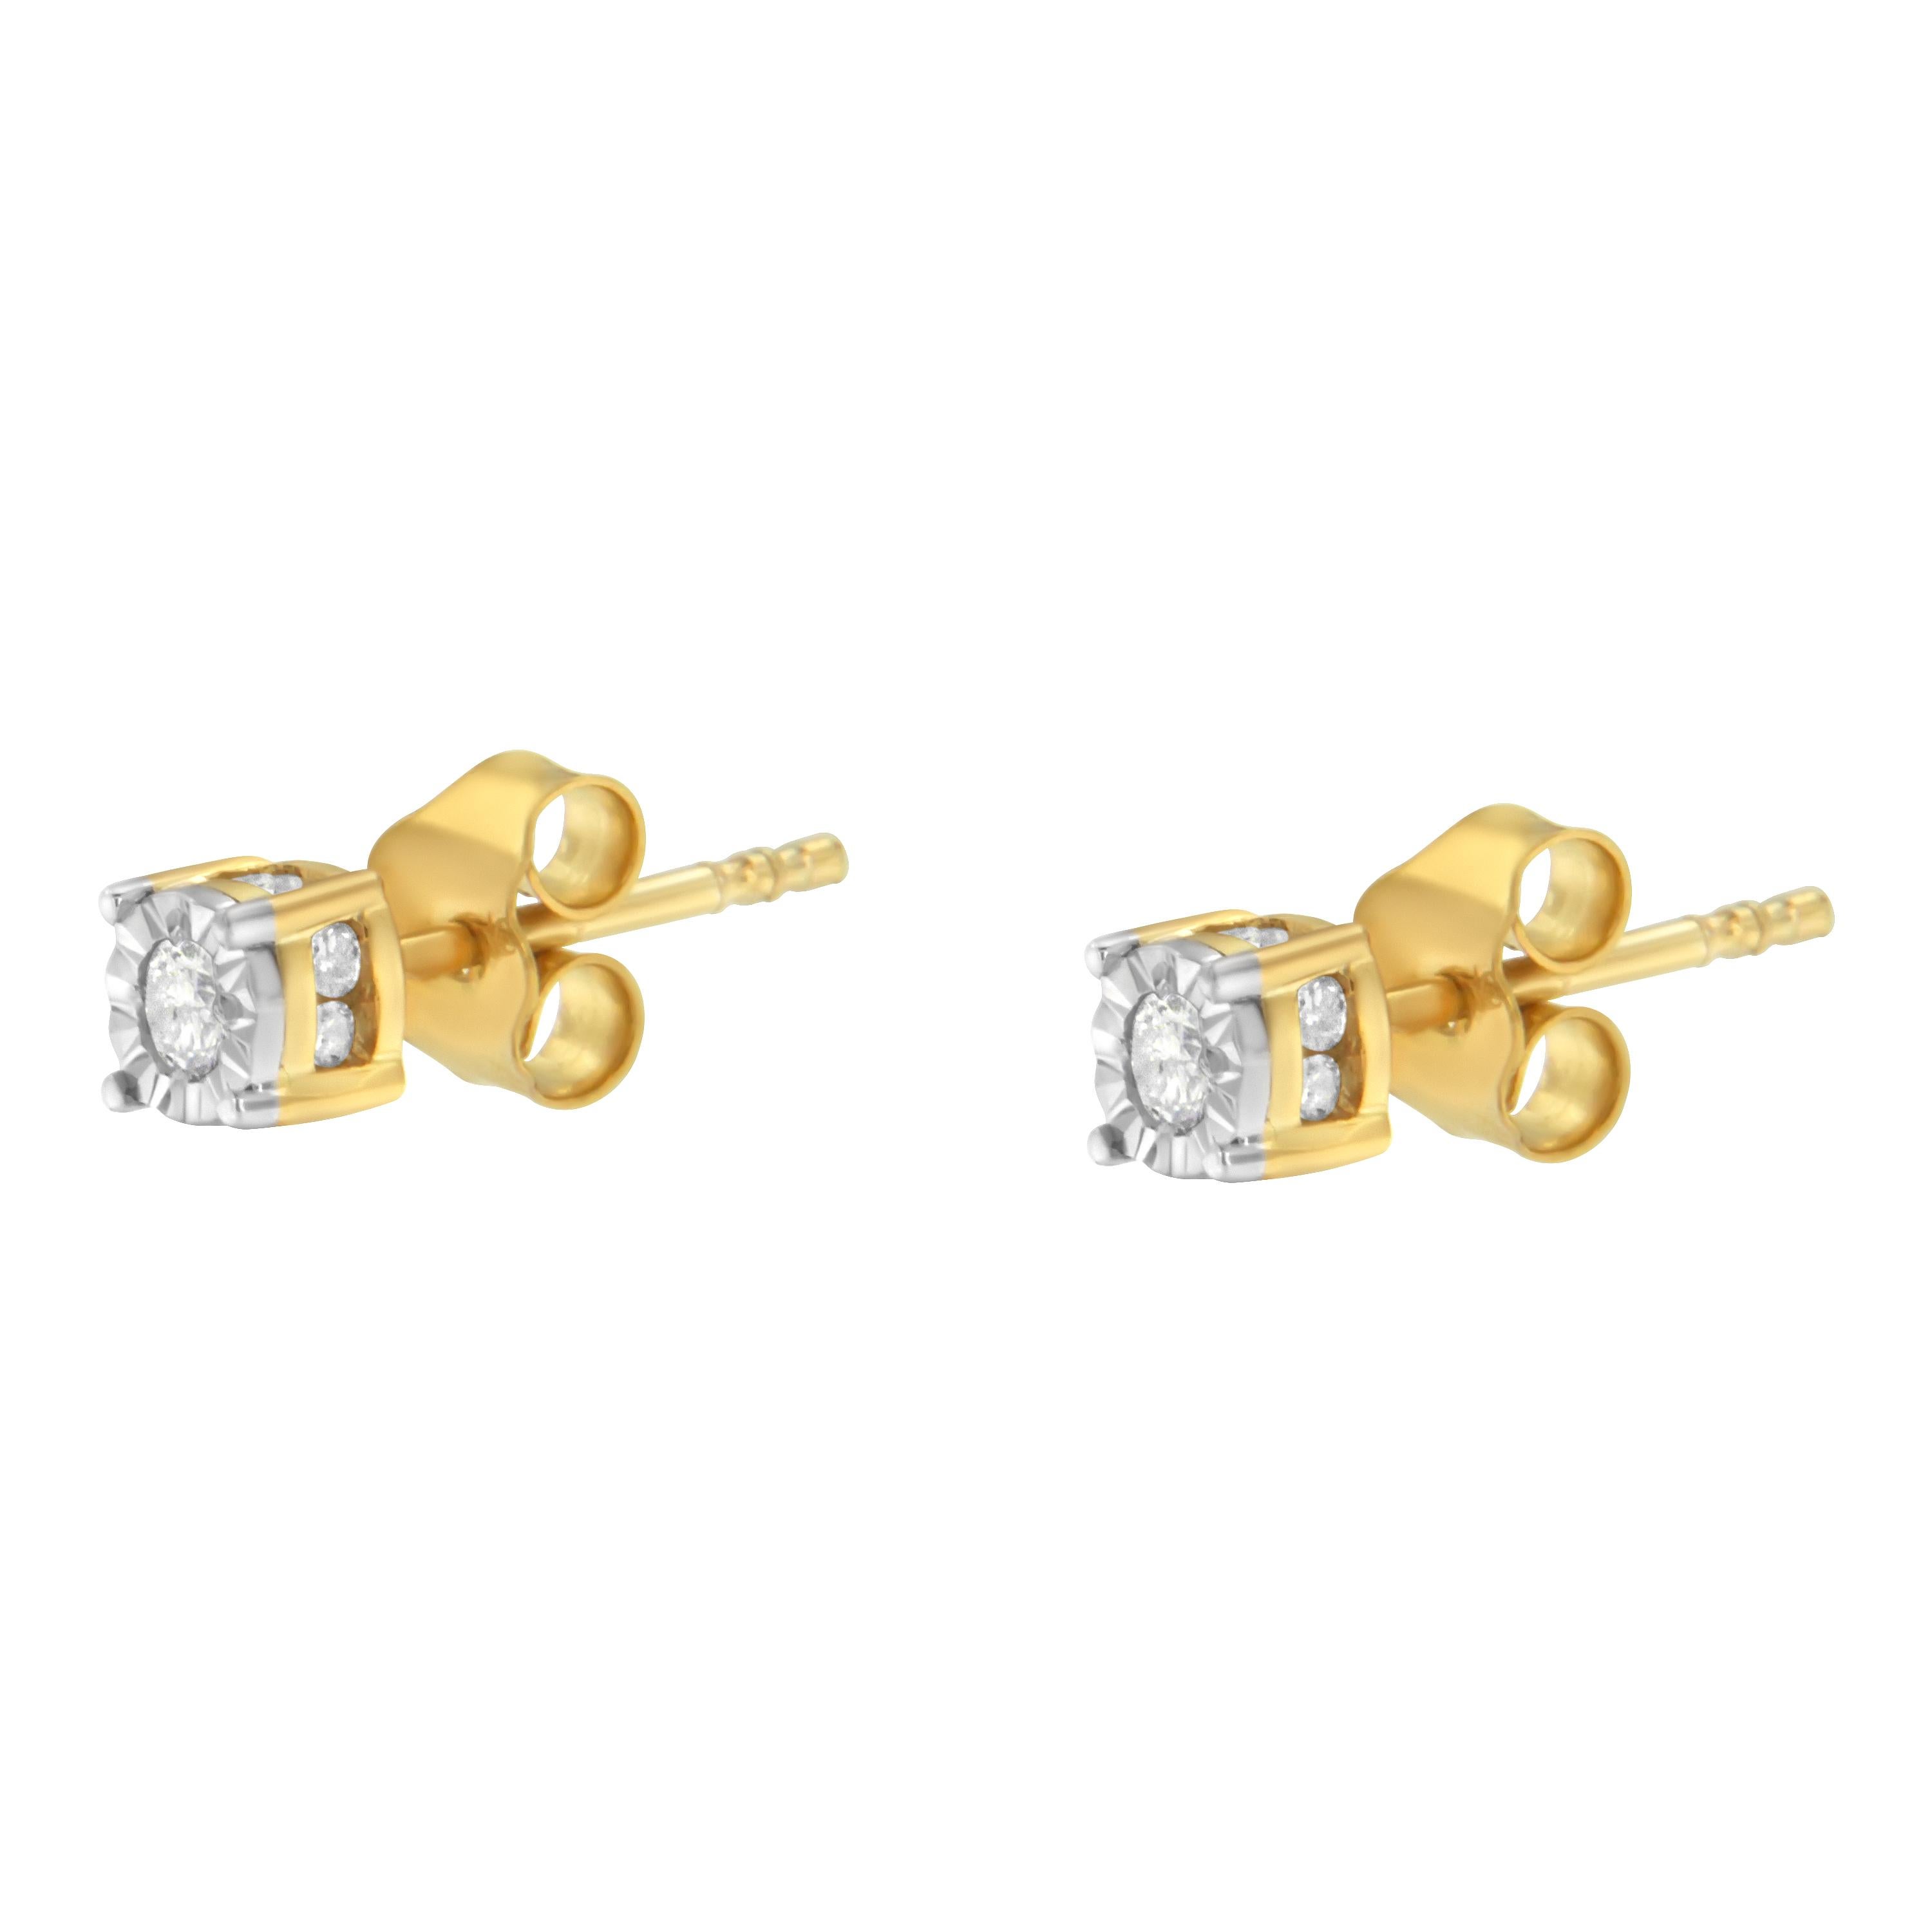 Contemporary Yellow Gold Plated Sterling Silver 1/4 Carat Diamond Stud Earrings For Sale